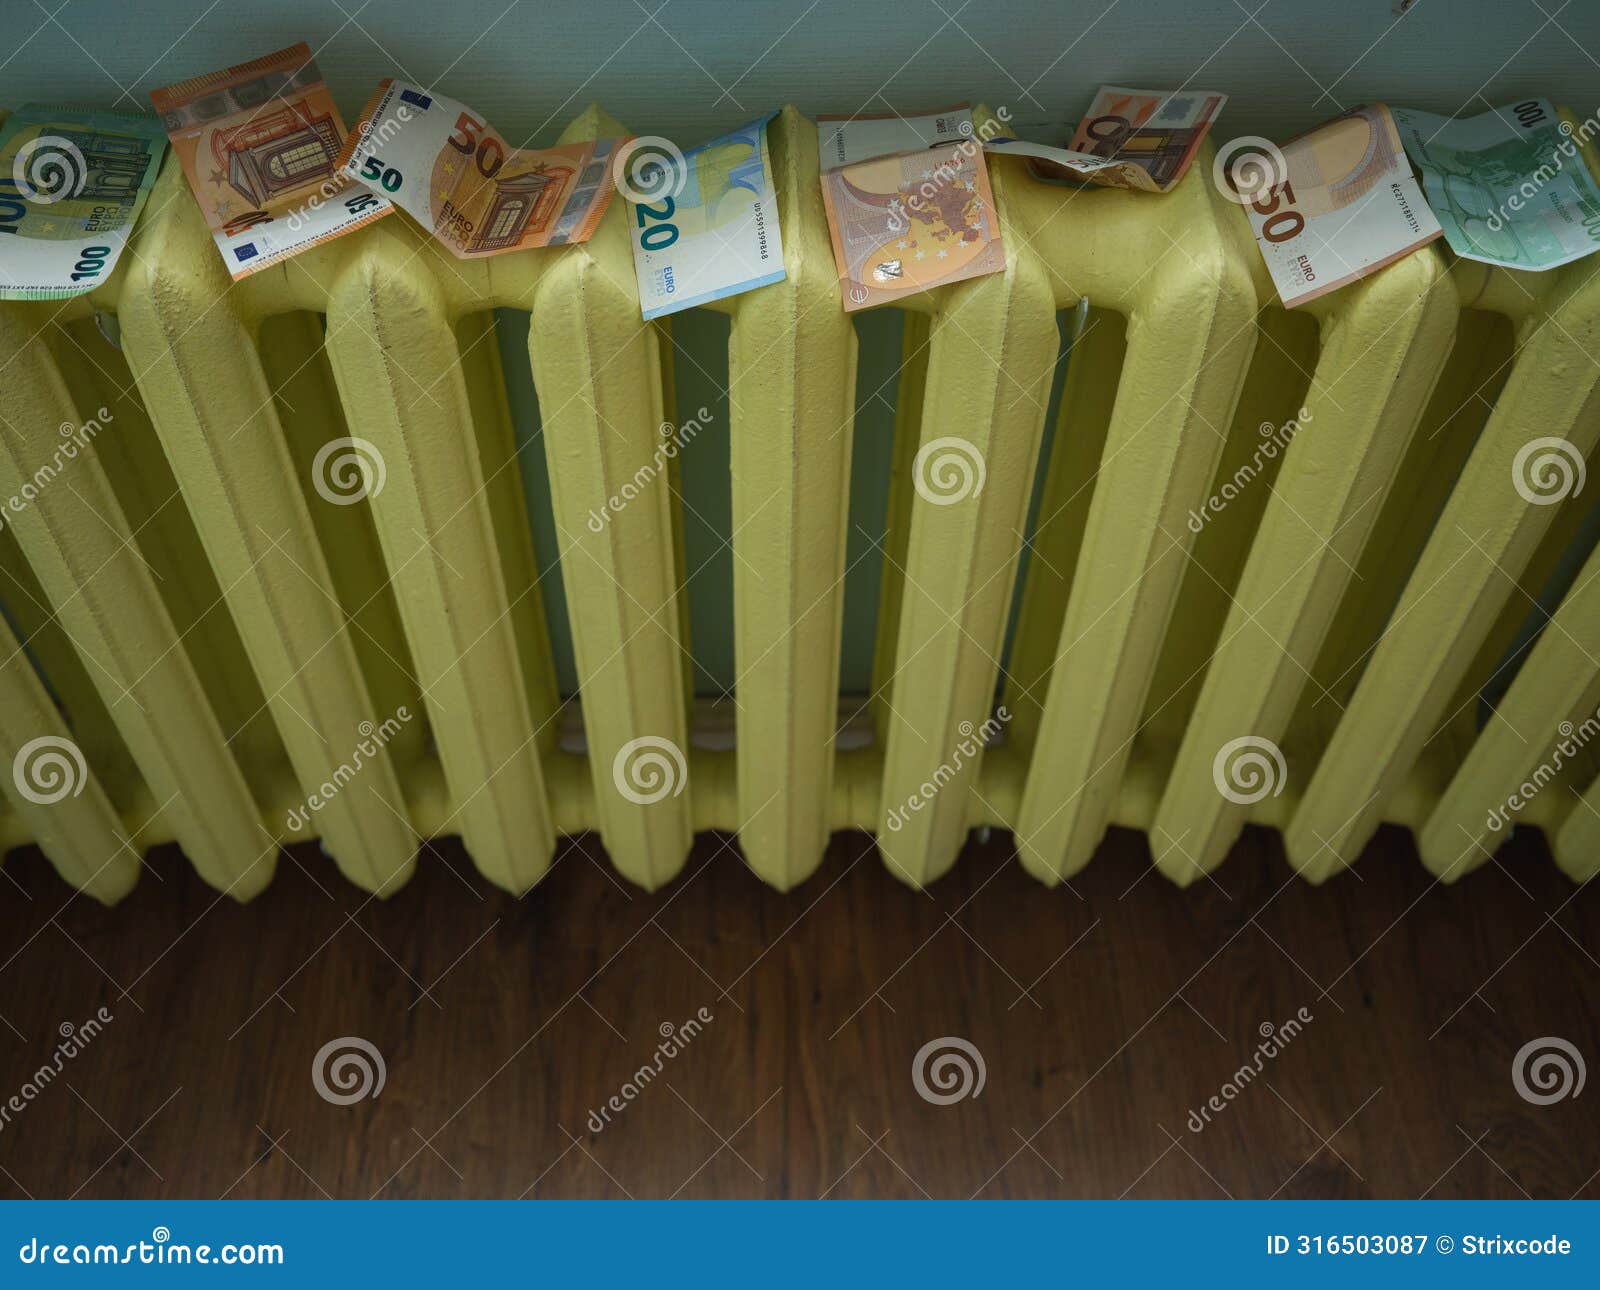 money laundering concept image with copyspace. euro banknotes drying on yellow radiator